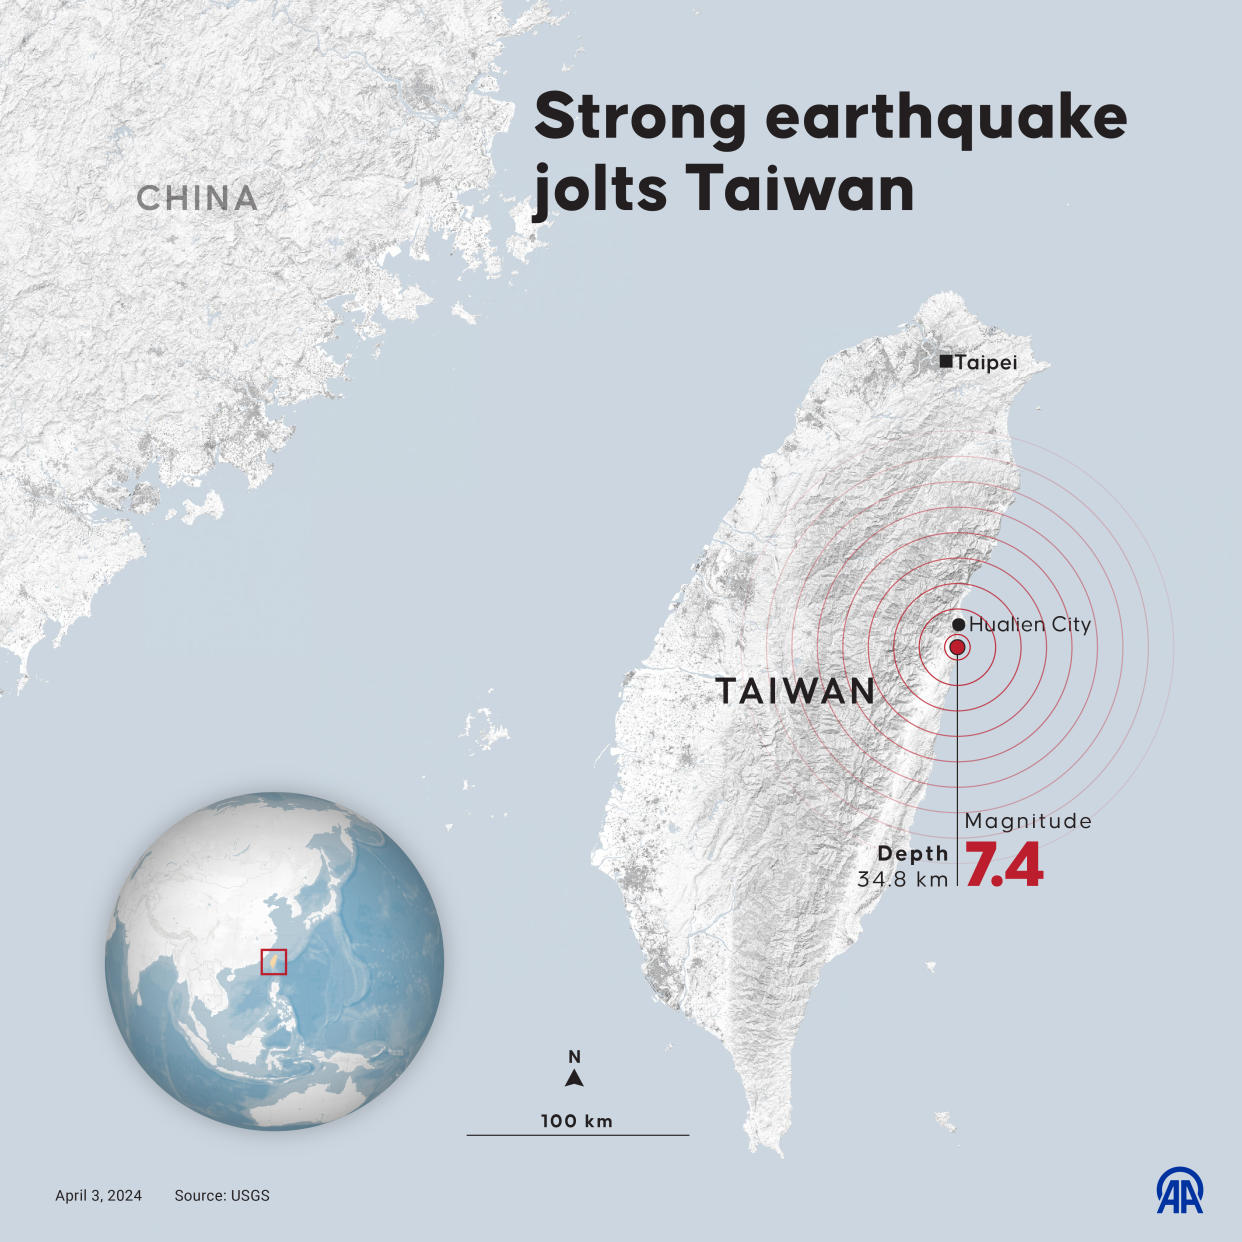 A map showing Taiwan in relation to China.